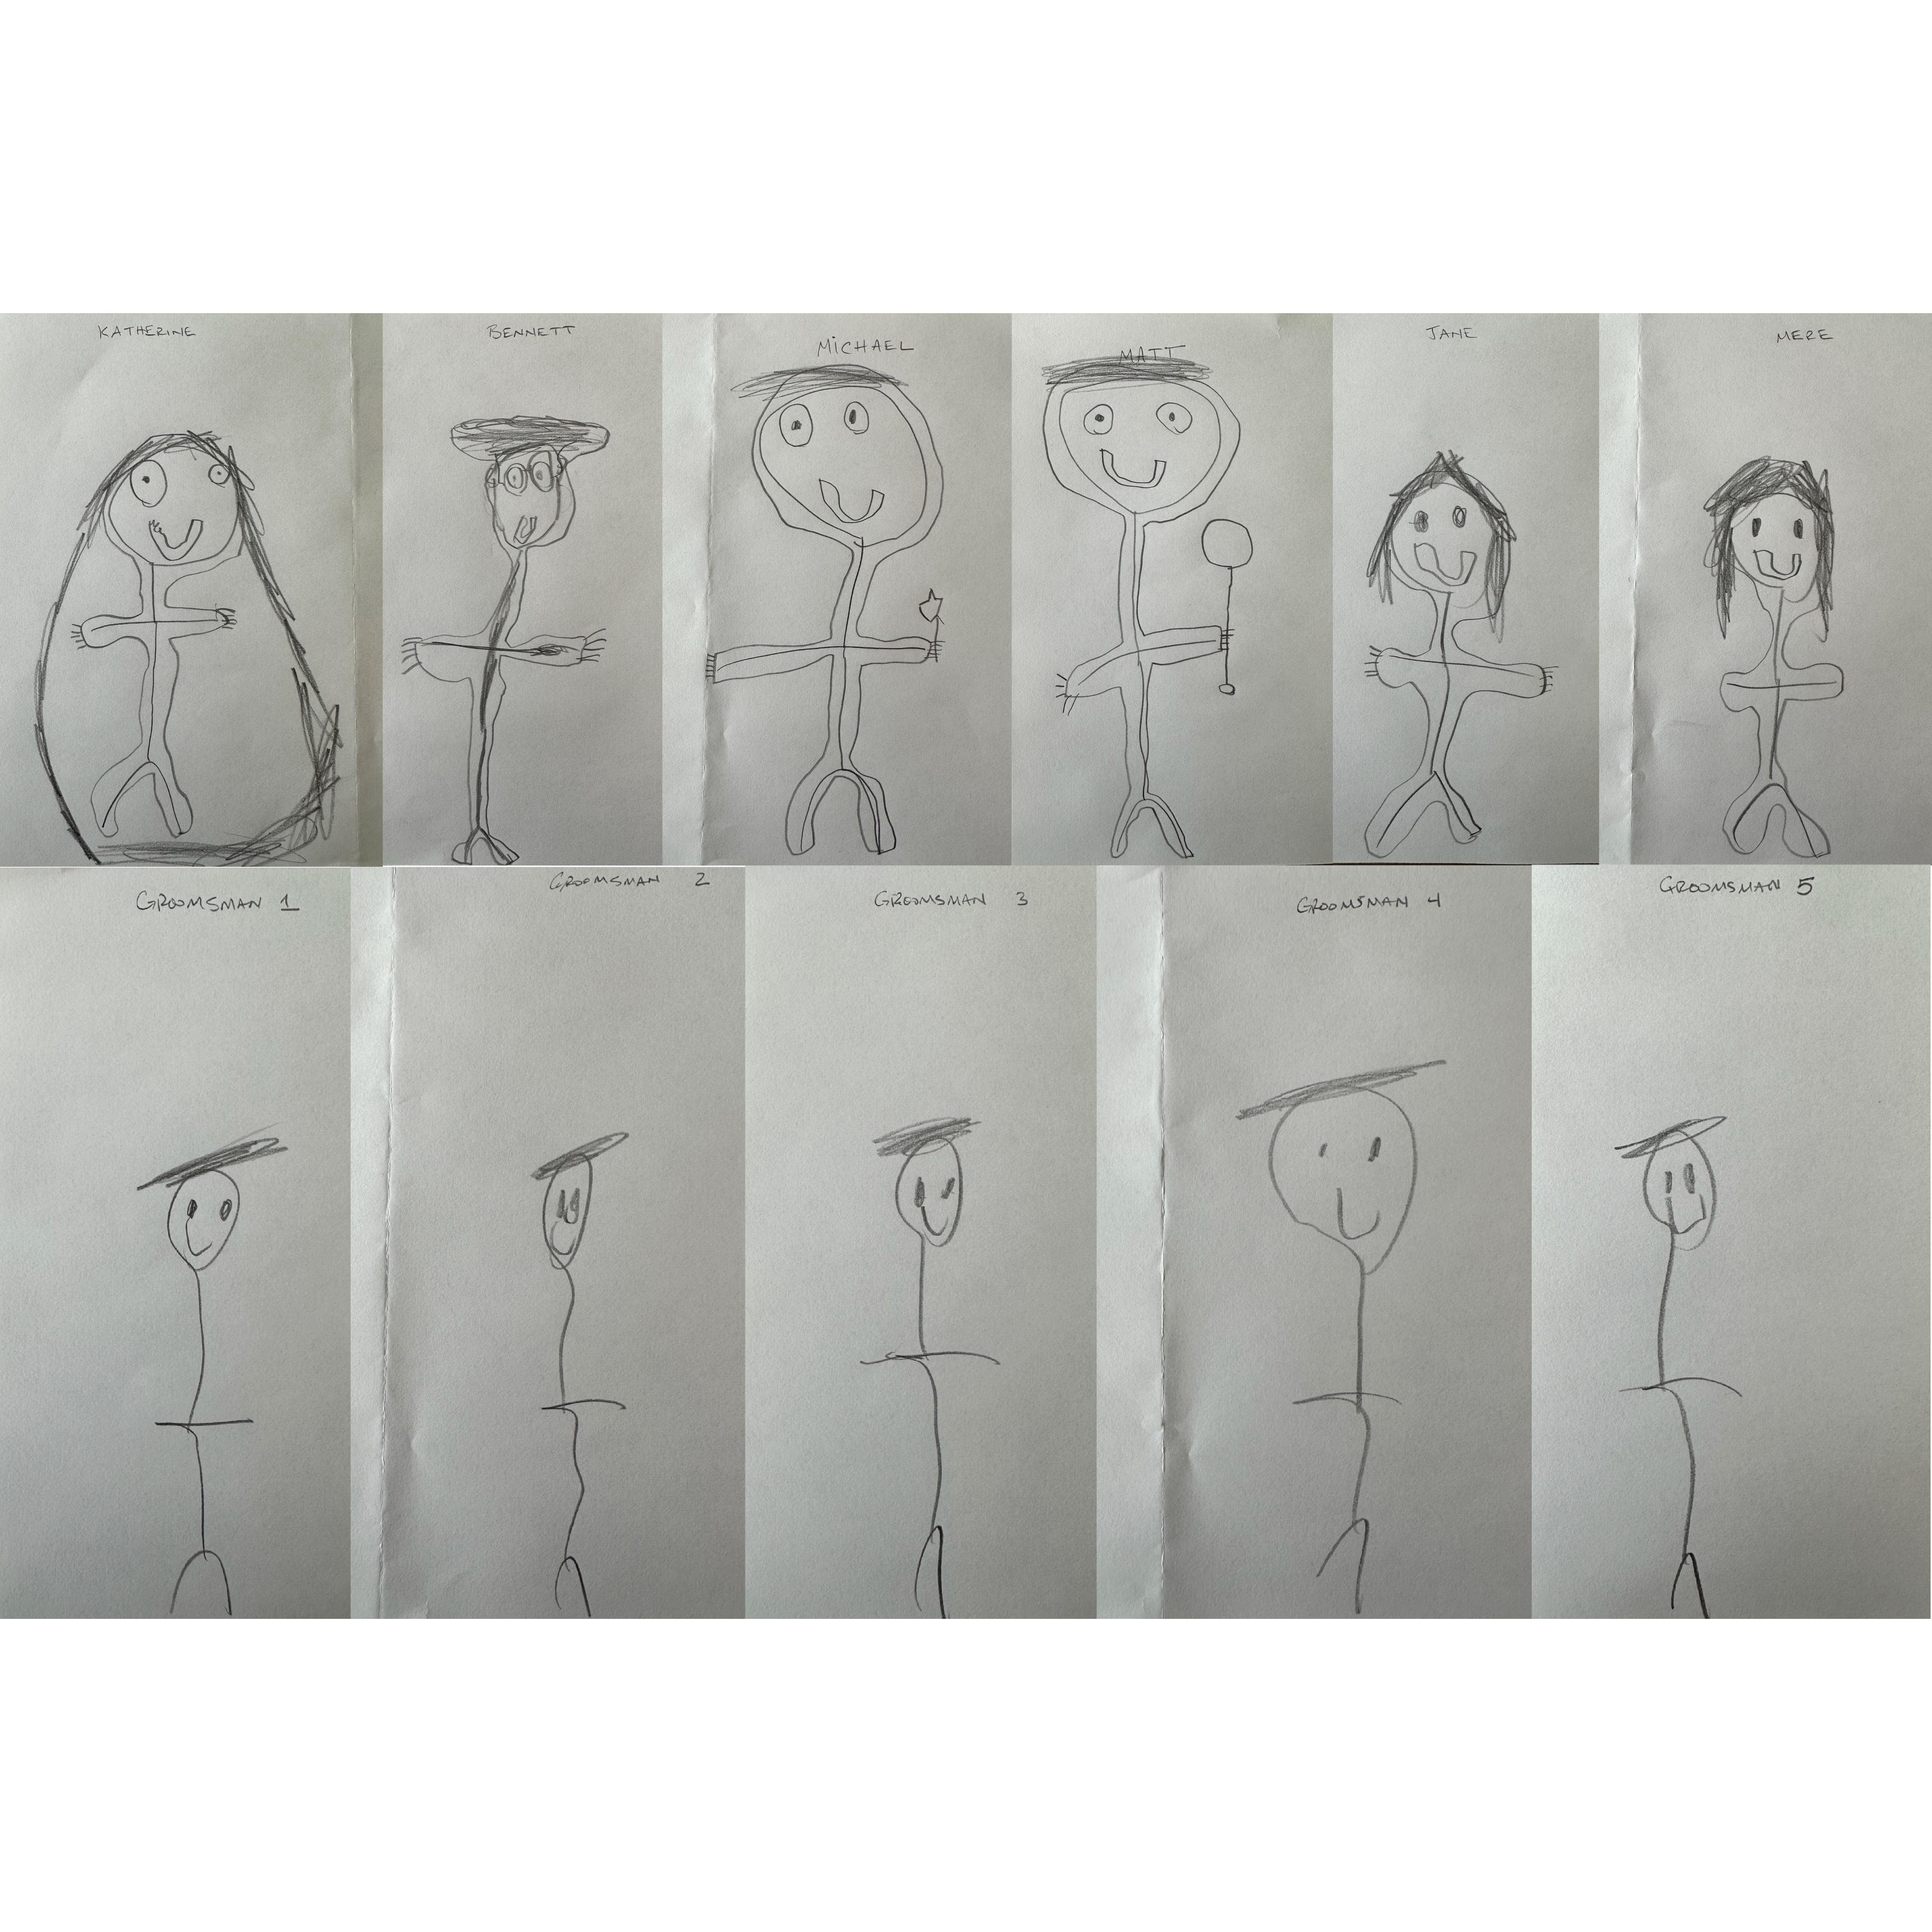 Our Bridal Party as drawn by Milo (ring bearer, age 5)